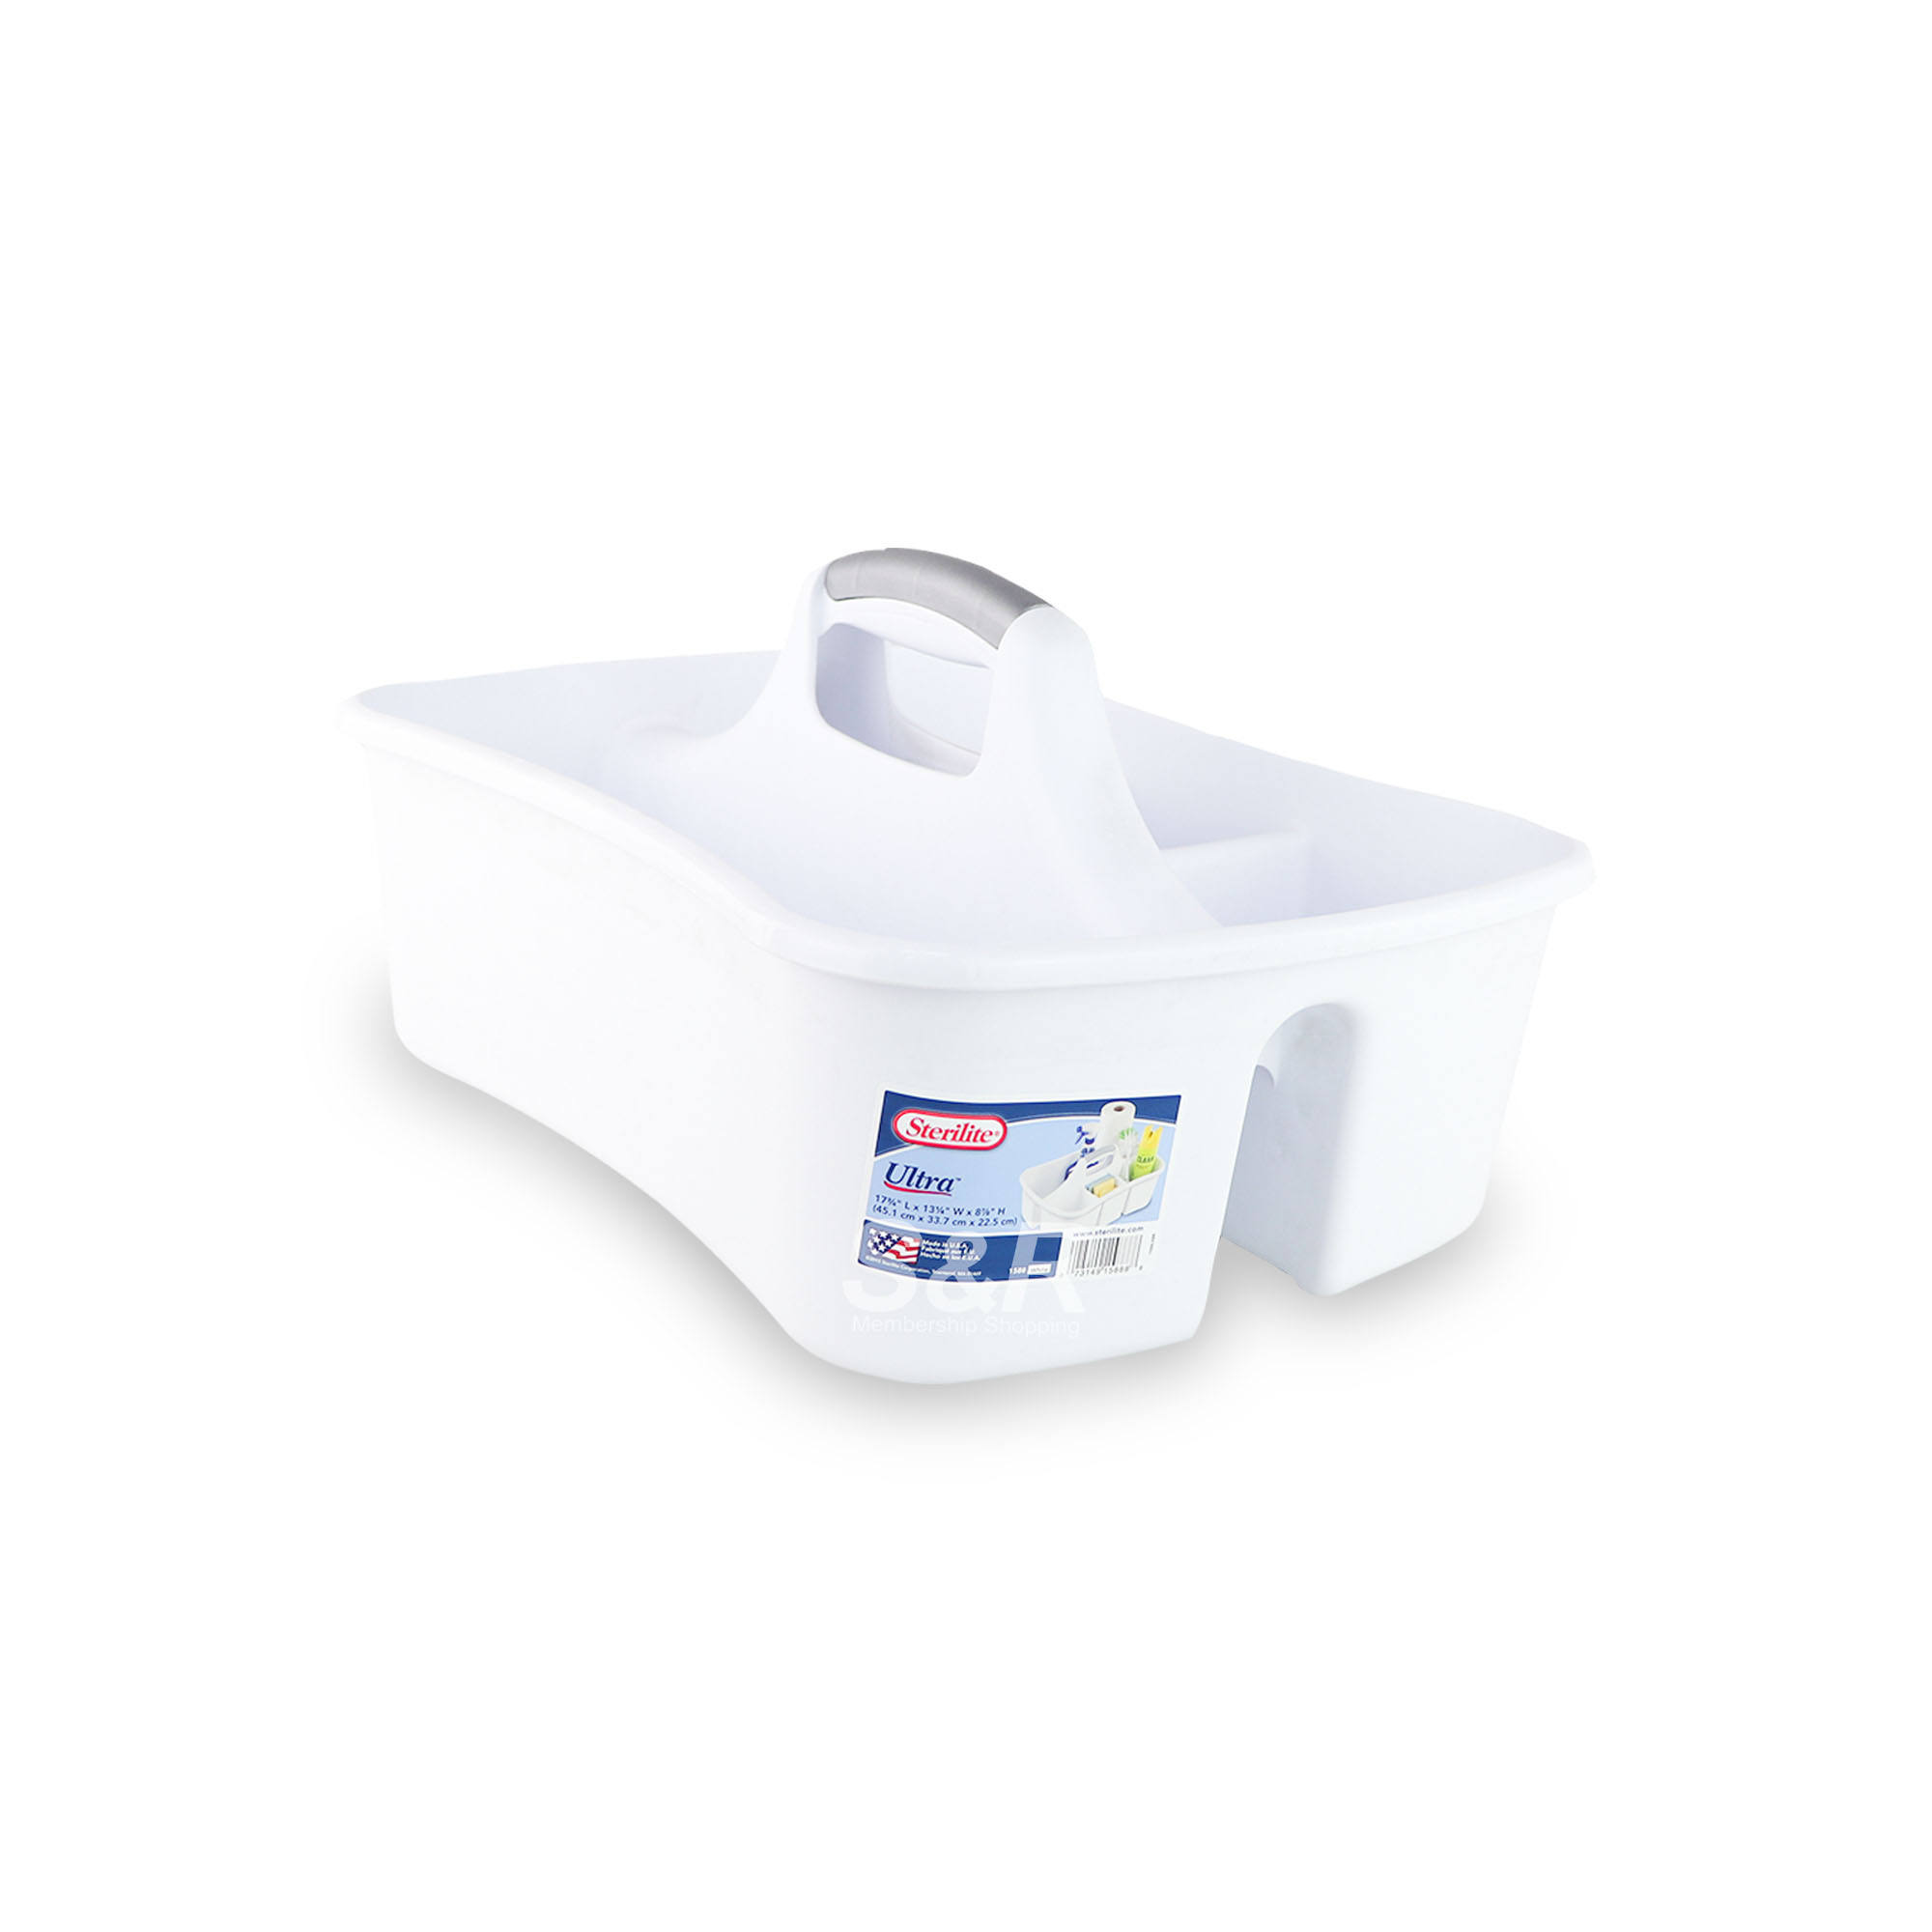 Sterilite Ultra Cleaning Caddy 1pc